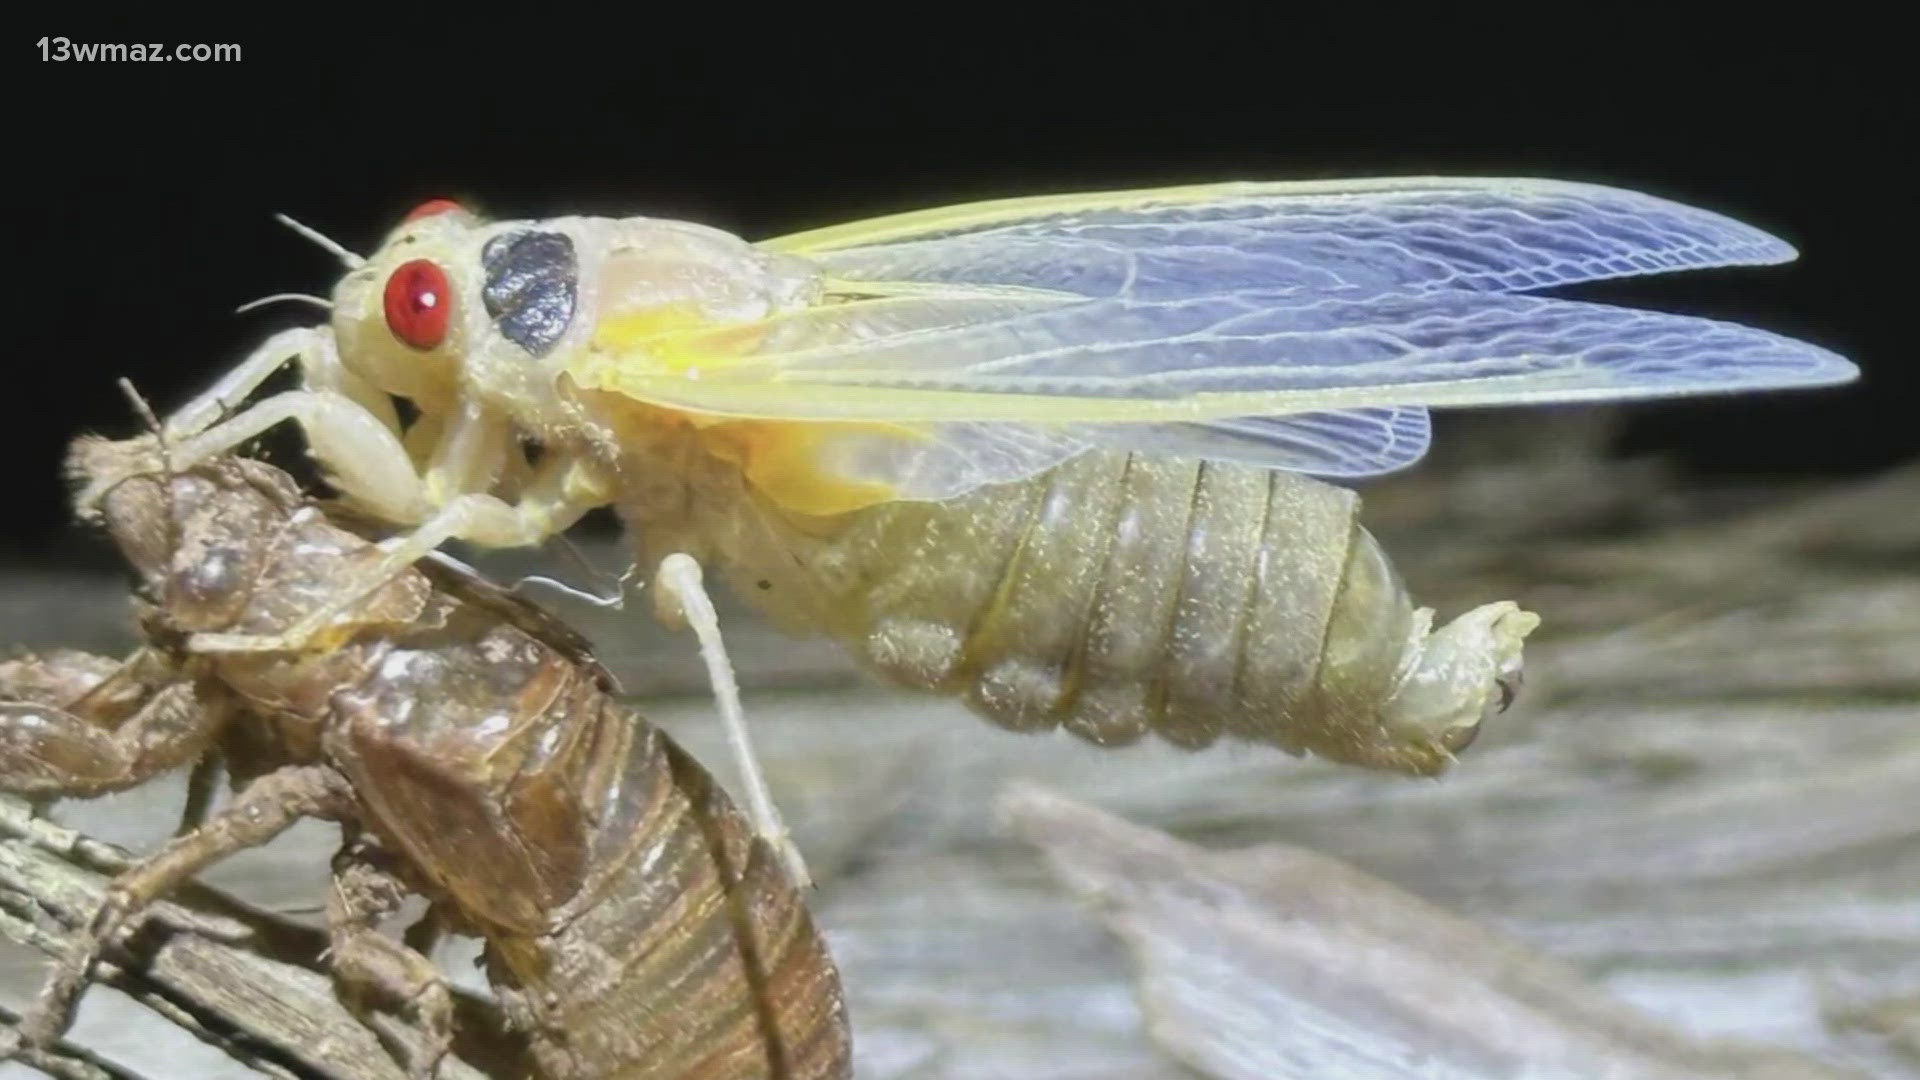 Meteorologist Jordan West talks with experts on why cicadas shed their skin.